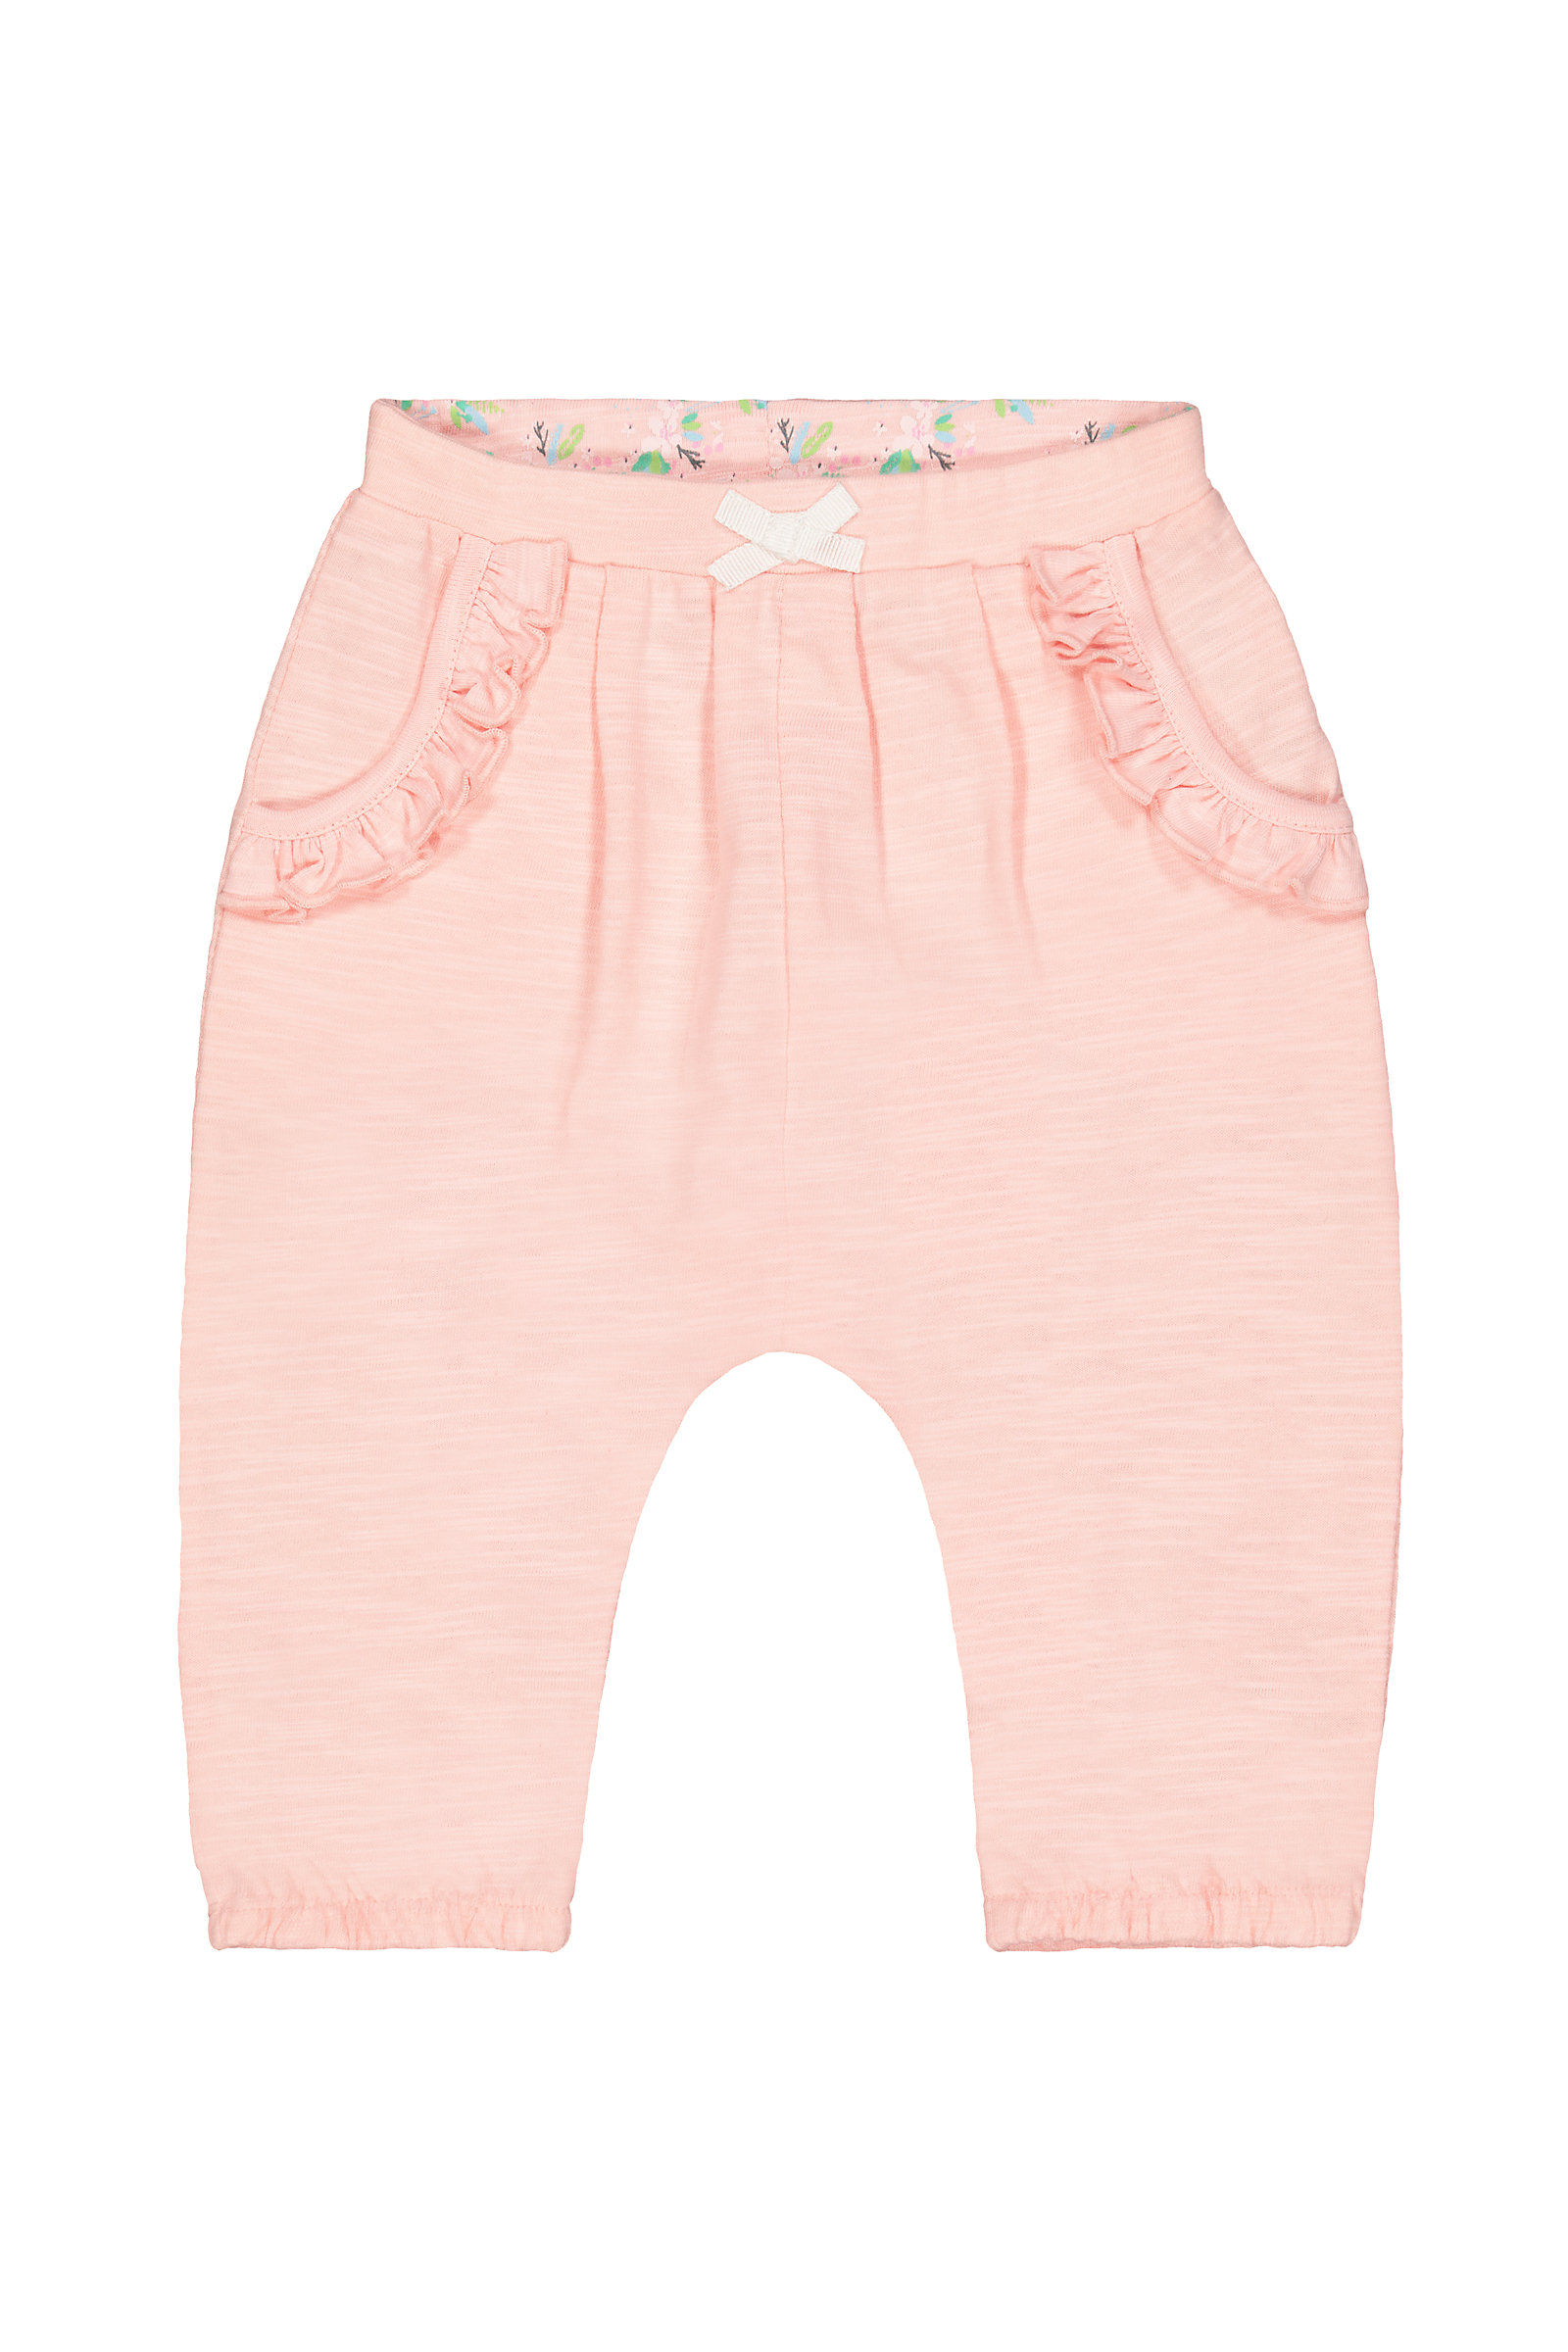 Mothercare Unisex Solid Pink Trousers